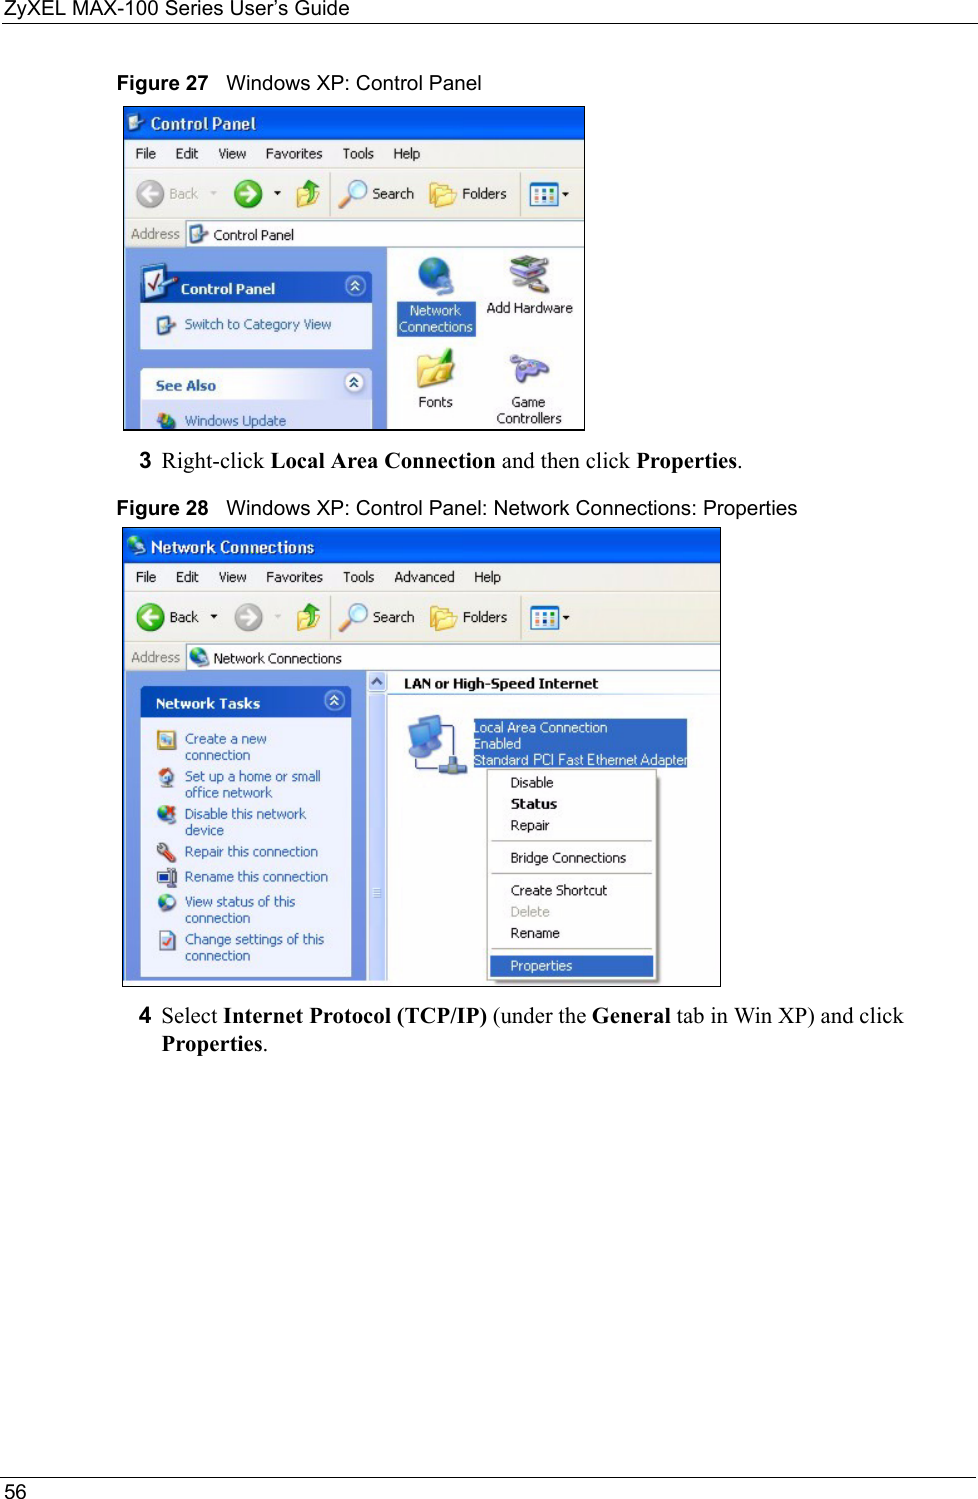 ZyXEL MAX-100 Series User’s Guide56Figure 27   Windows XP: Control Panel3Right-click Local Area Connection and then click Properties.Figure 28   Windows XP: Control Panel: Network Connections: Properties4Select Internet Protocol (TCP/IP) (under the General tab in Win XP) and click Properties.